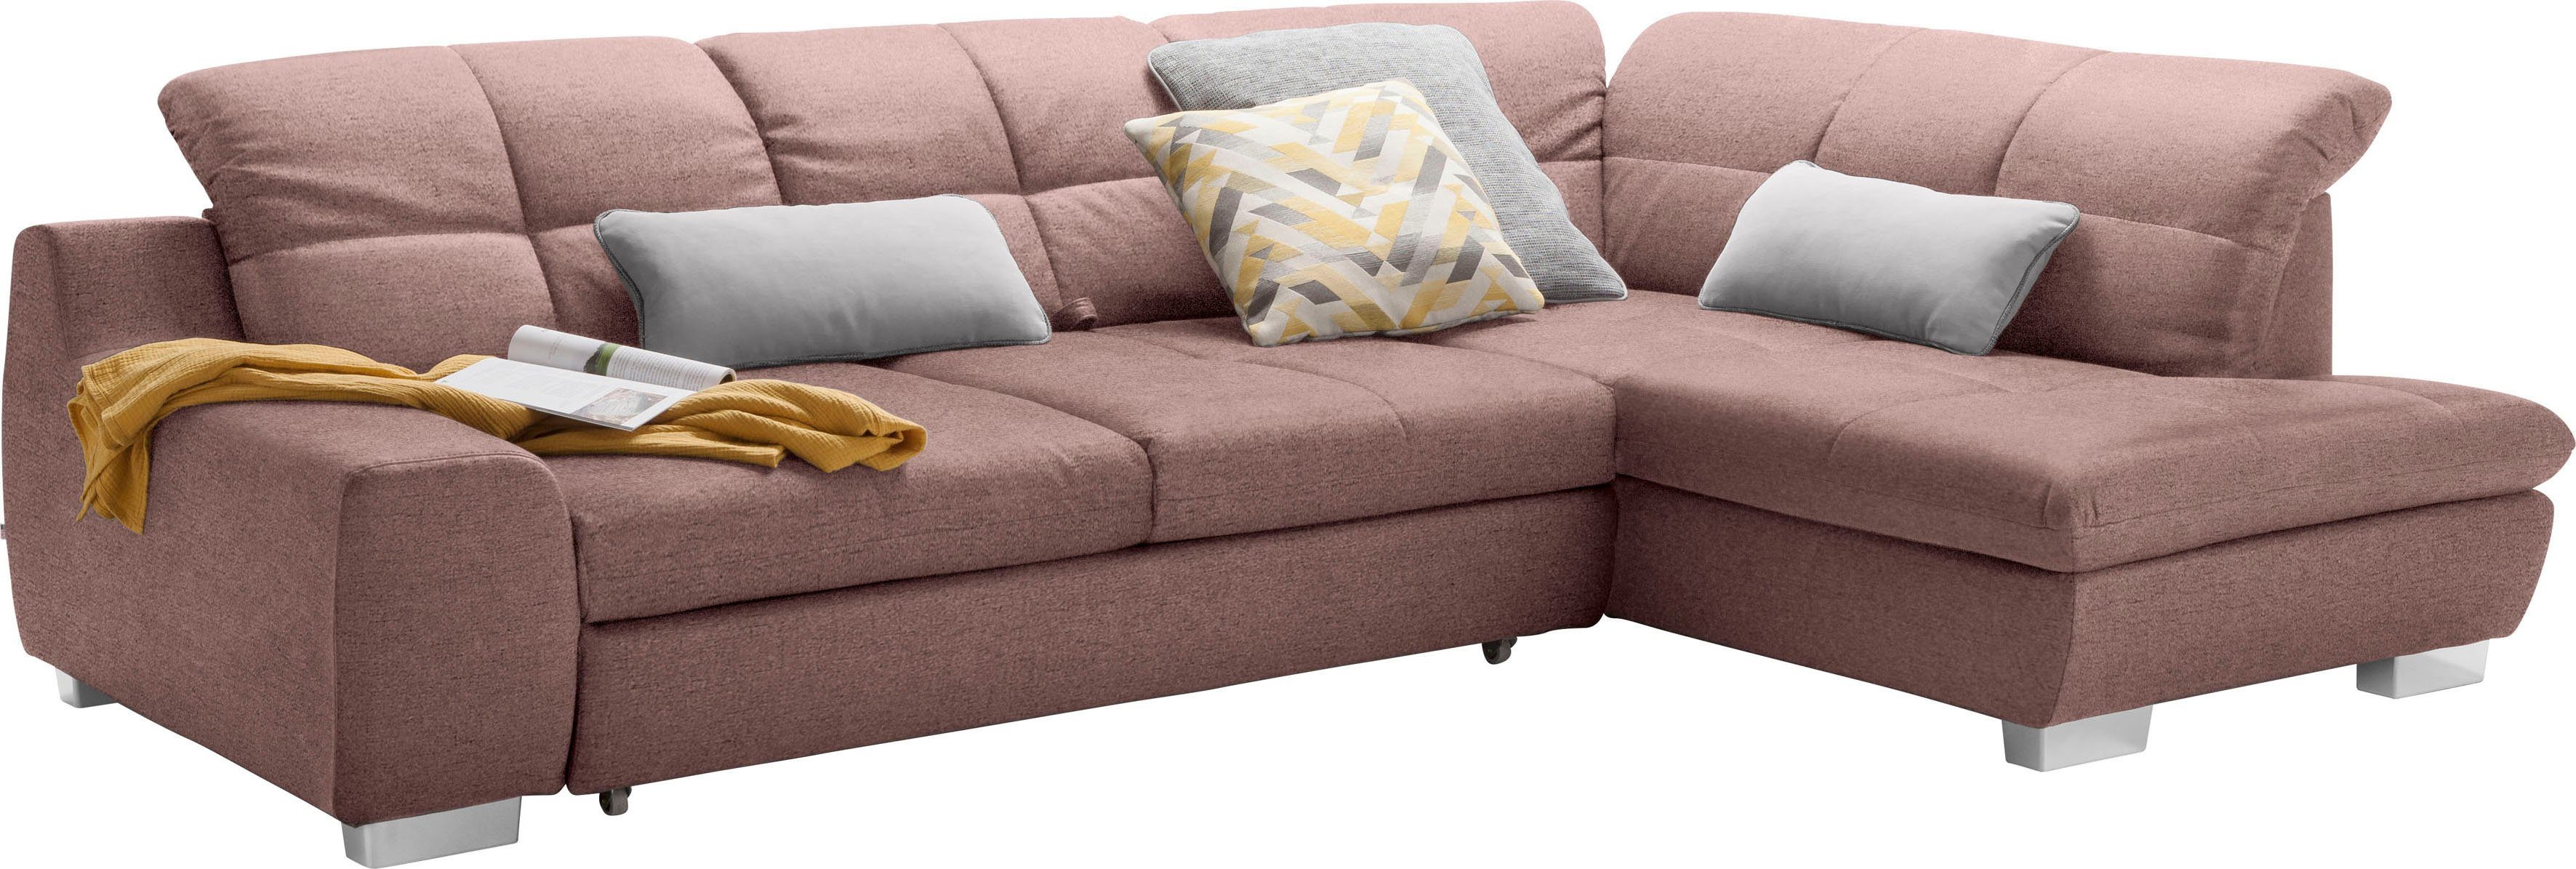 1200, one Bettfunktion Ecksofa set SO Musterring by mit wahlweise